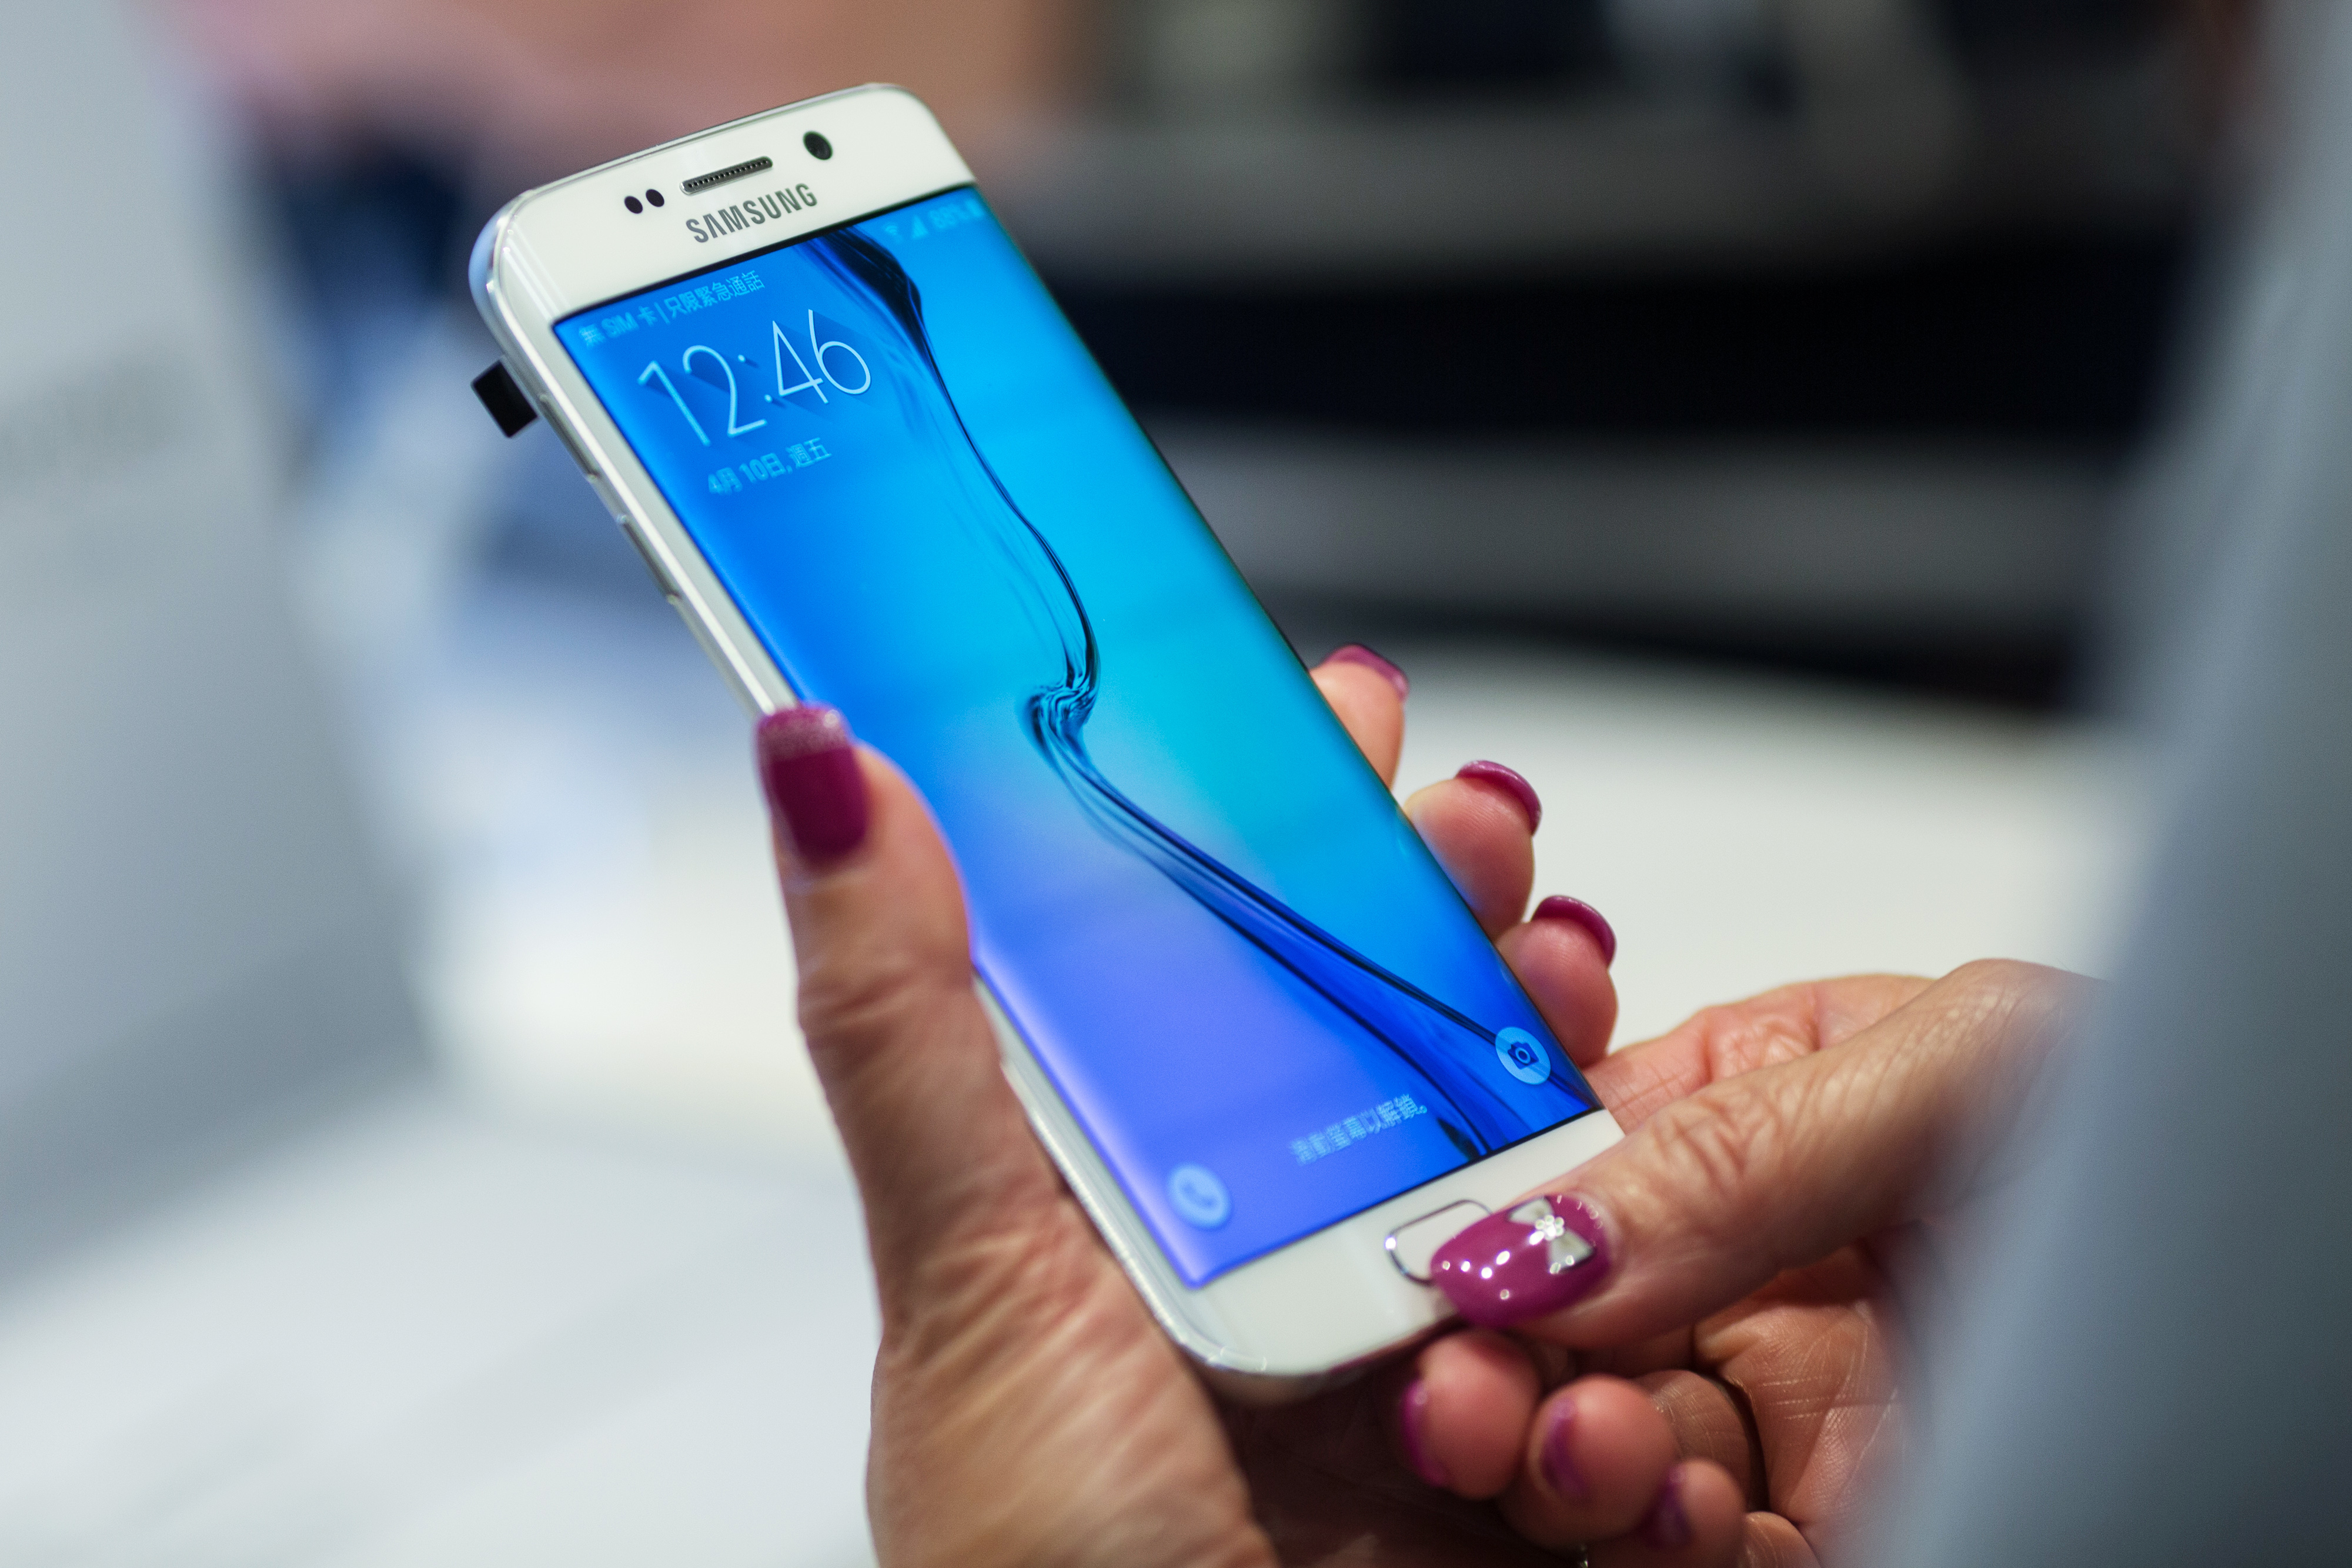 Samsung Electronics Co.'s Galaxy S6 And Galaxy S6 Edge Smartphones Go On Sale In Hong Kong